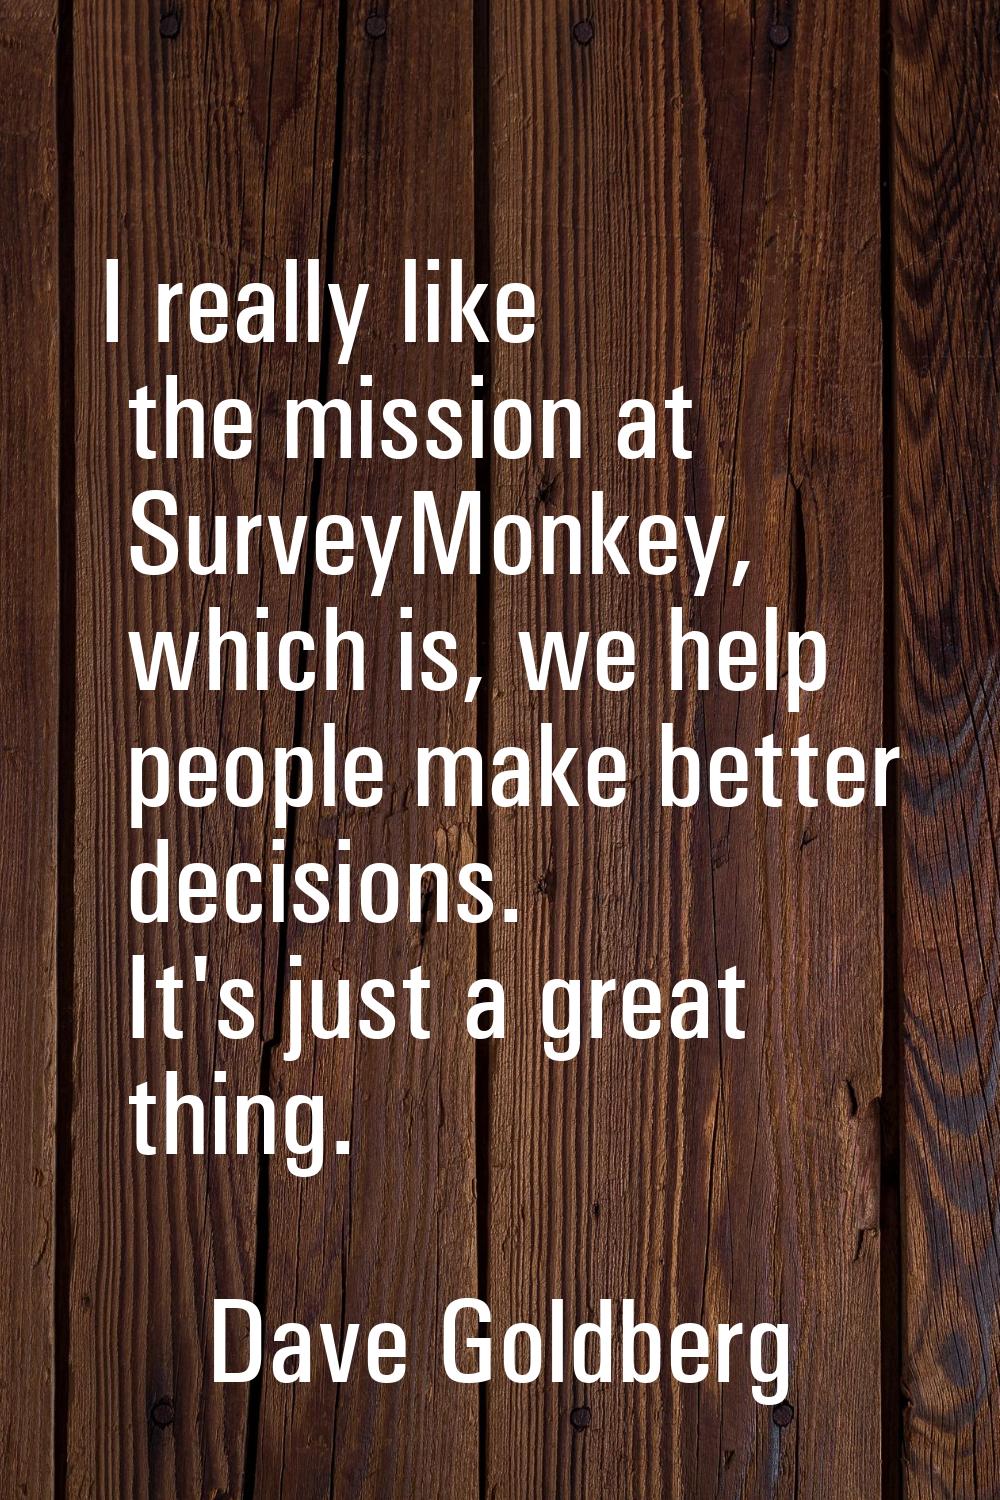 I really like the mission at SurveyMonkey, which is, we help people make better decisions. It's jus